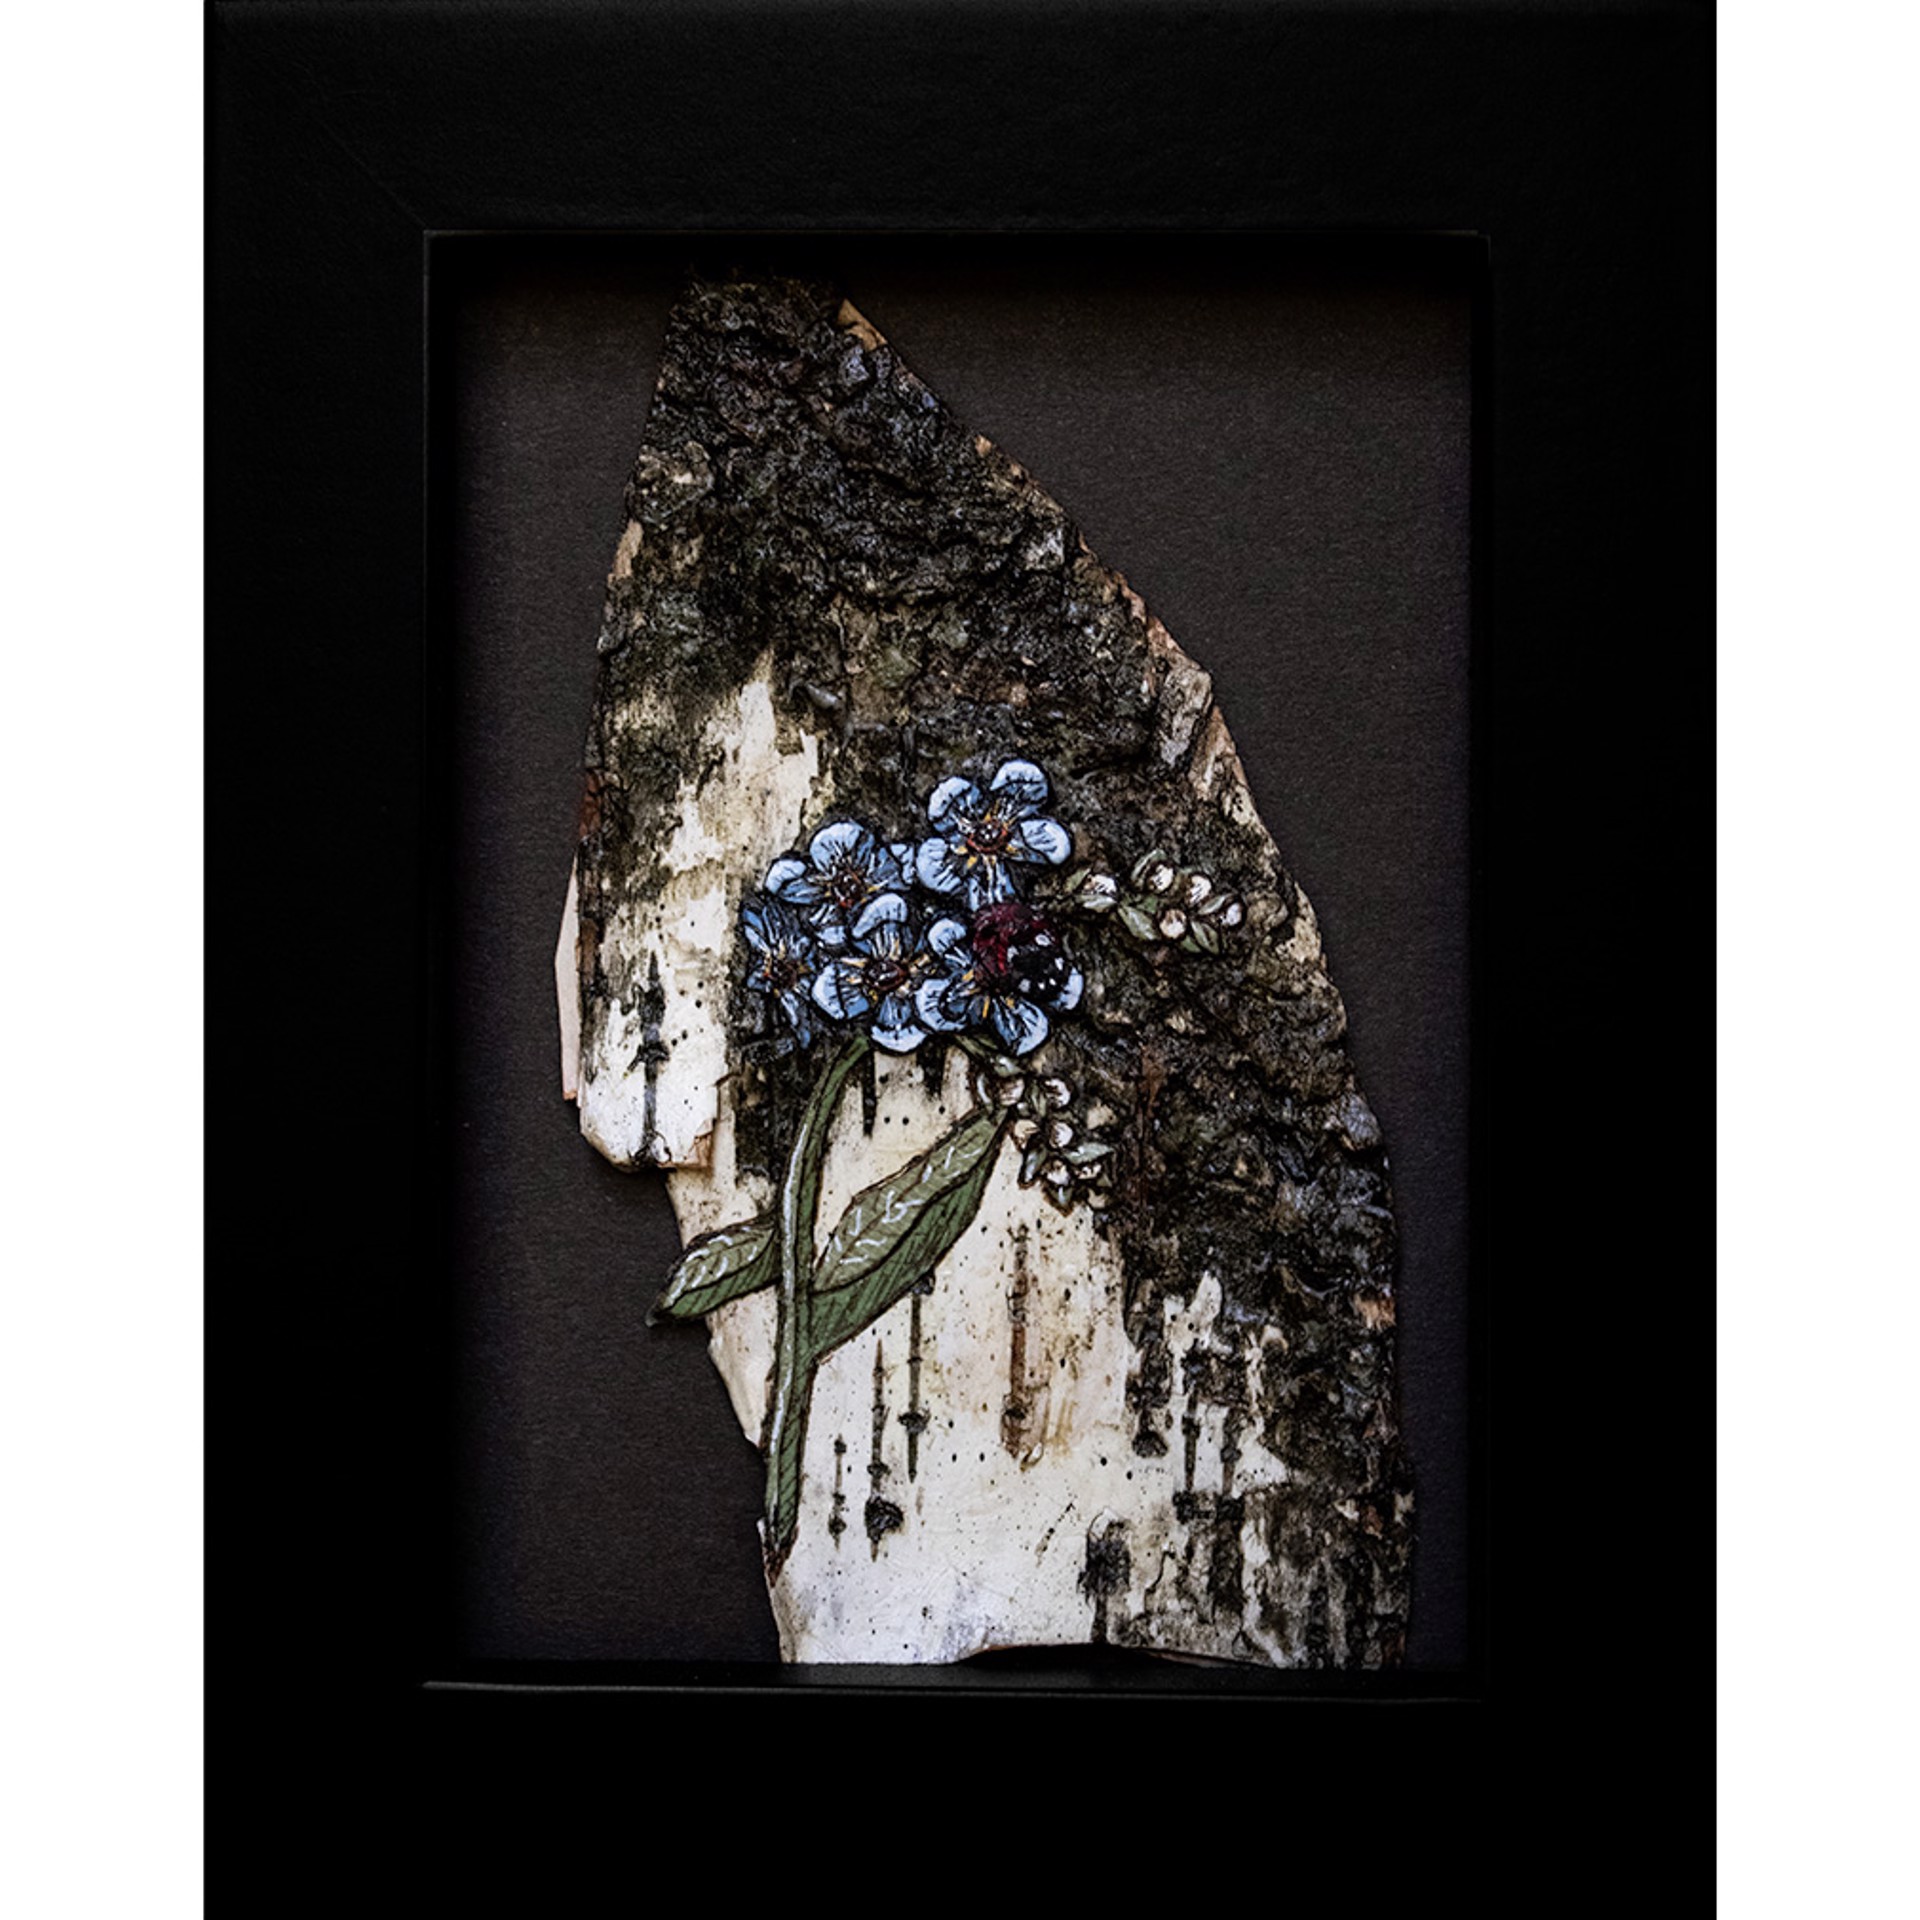 Forget Me Not With Ladybug (Collage) by Willow Bayer